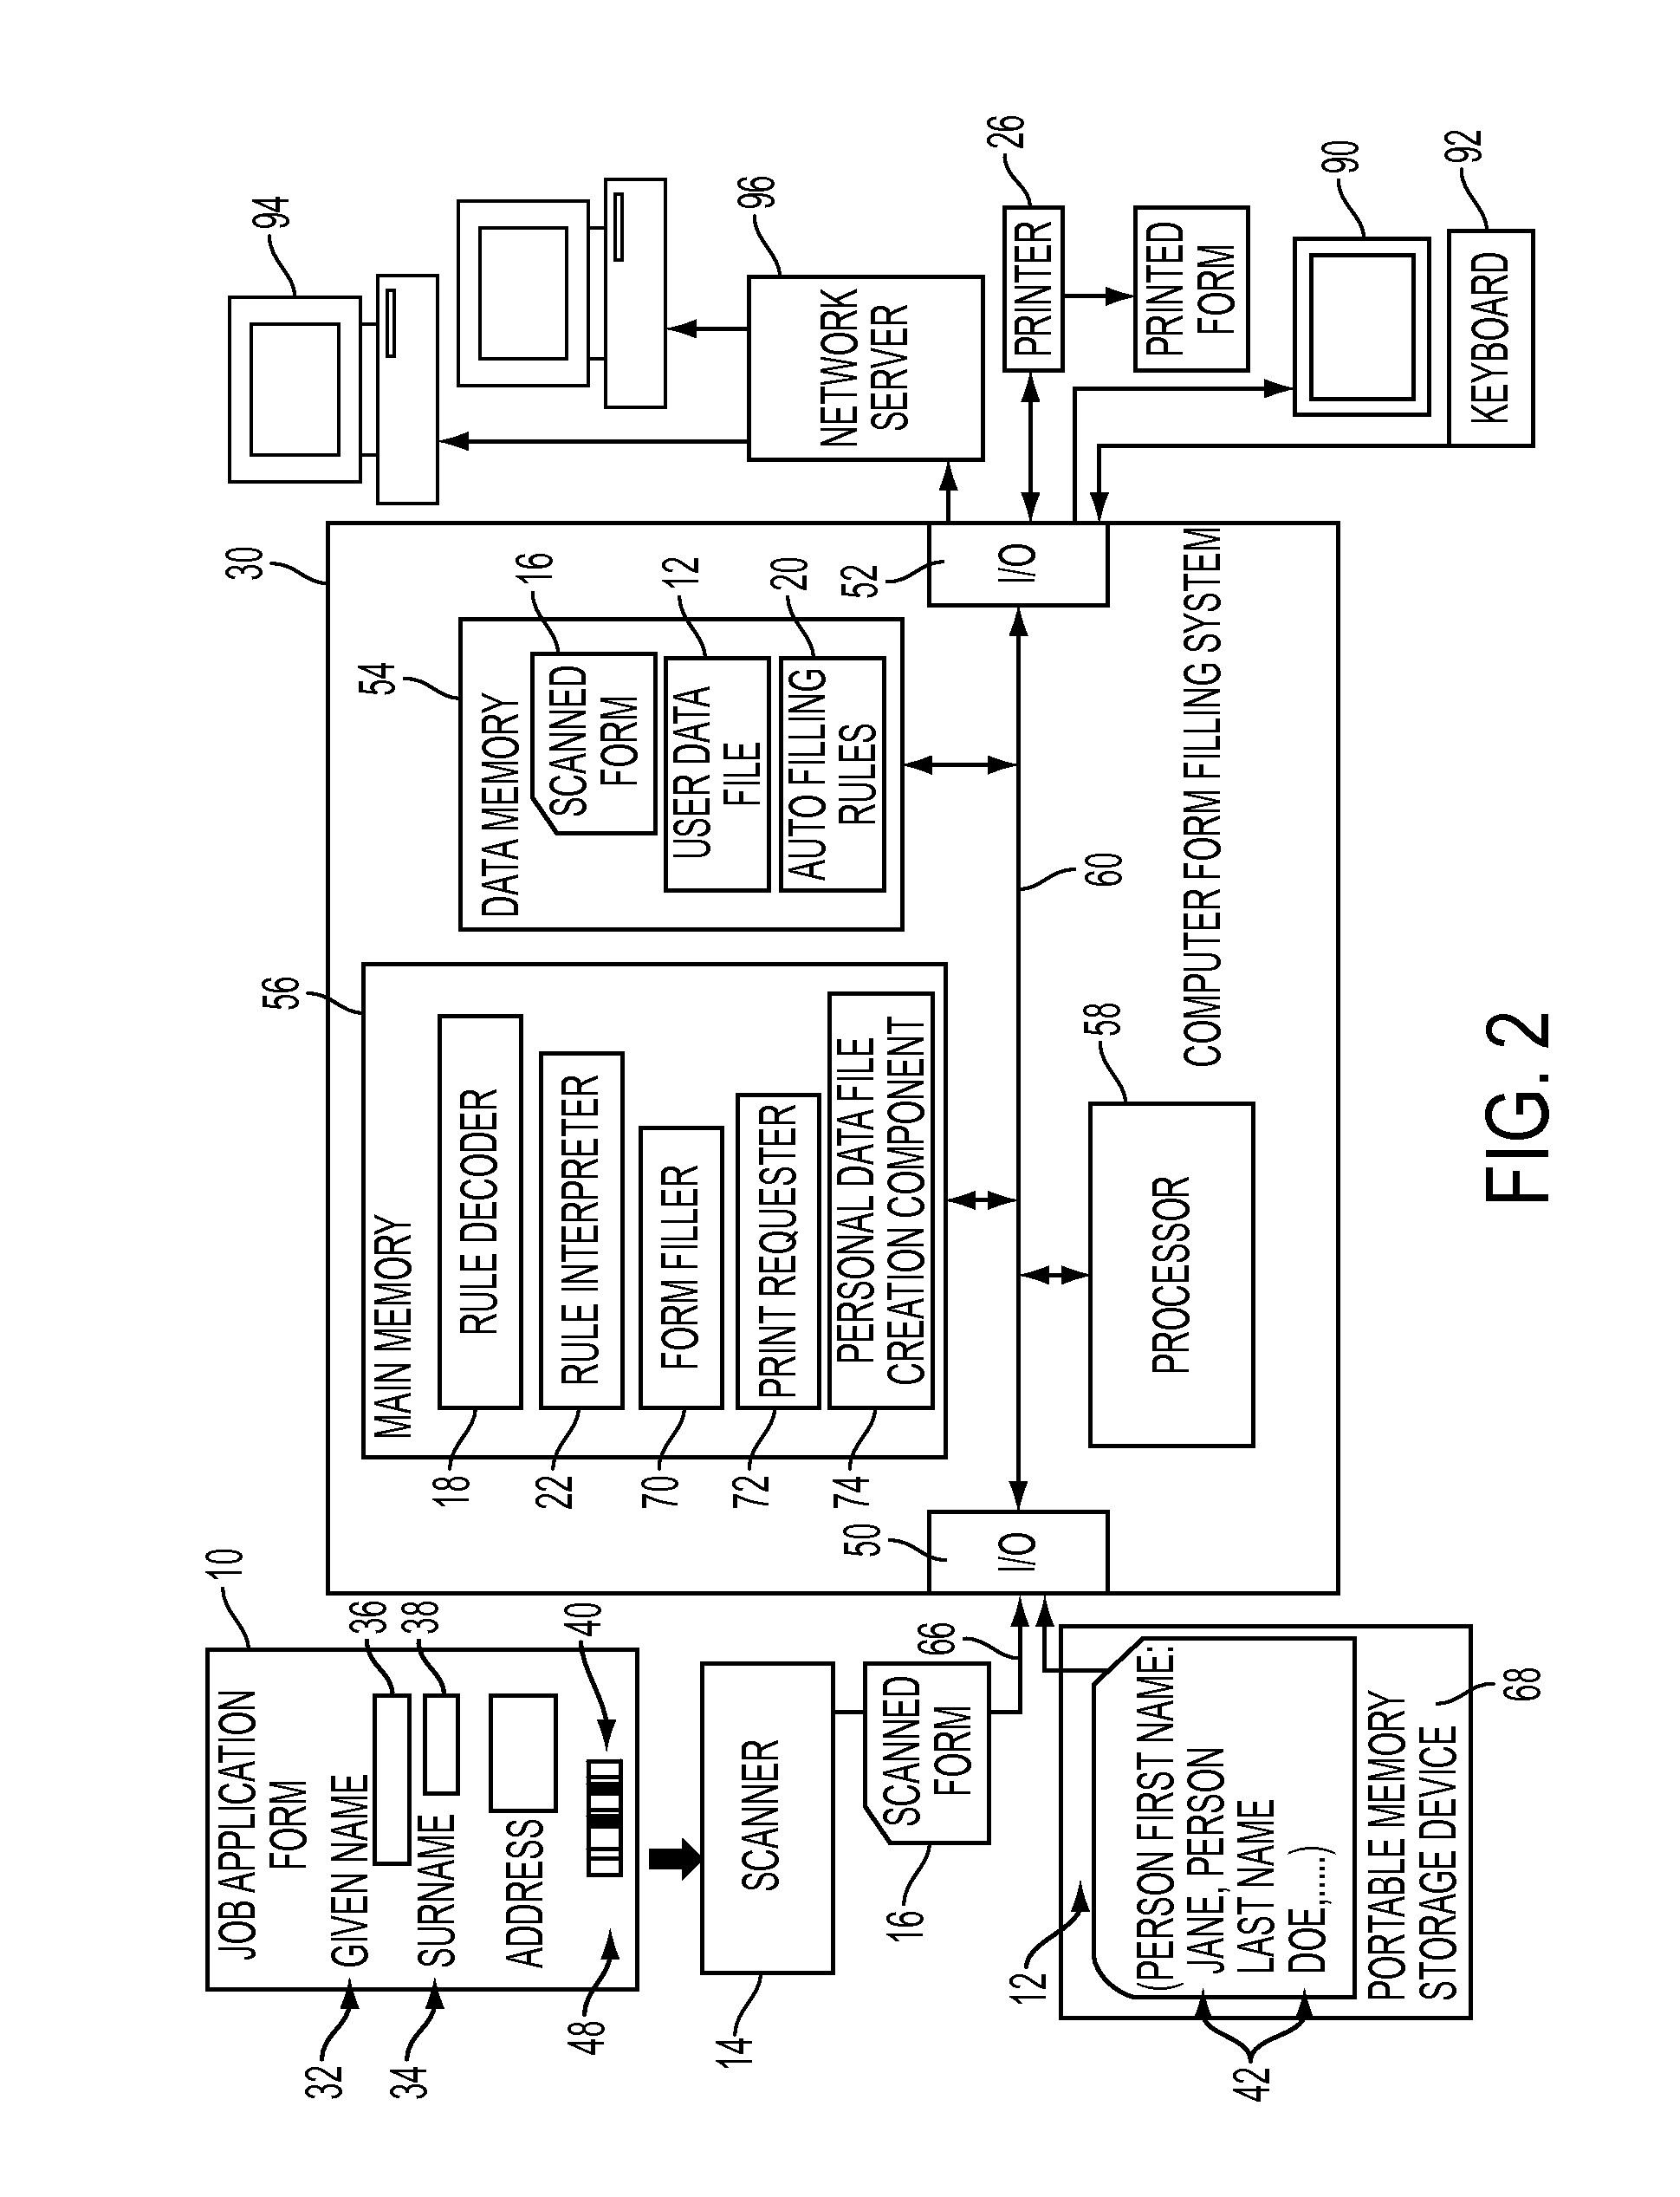 Method and apparatus for automatic filling of forms with data